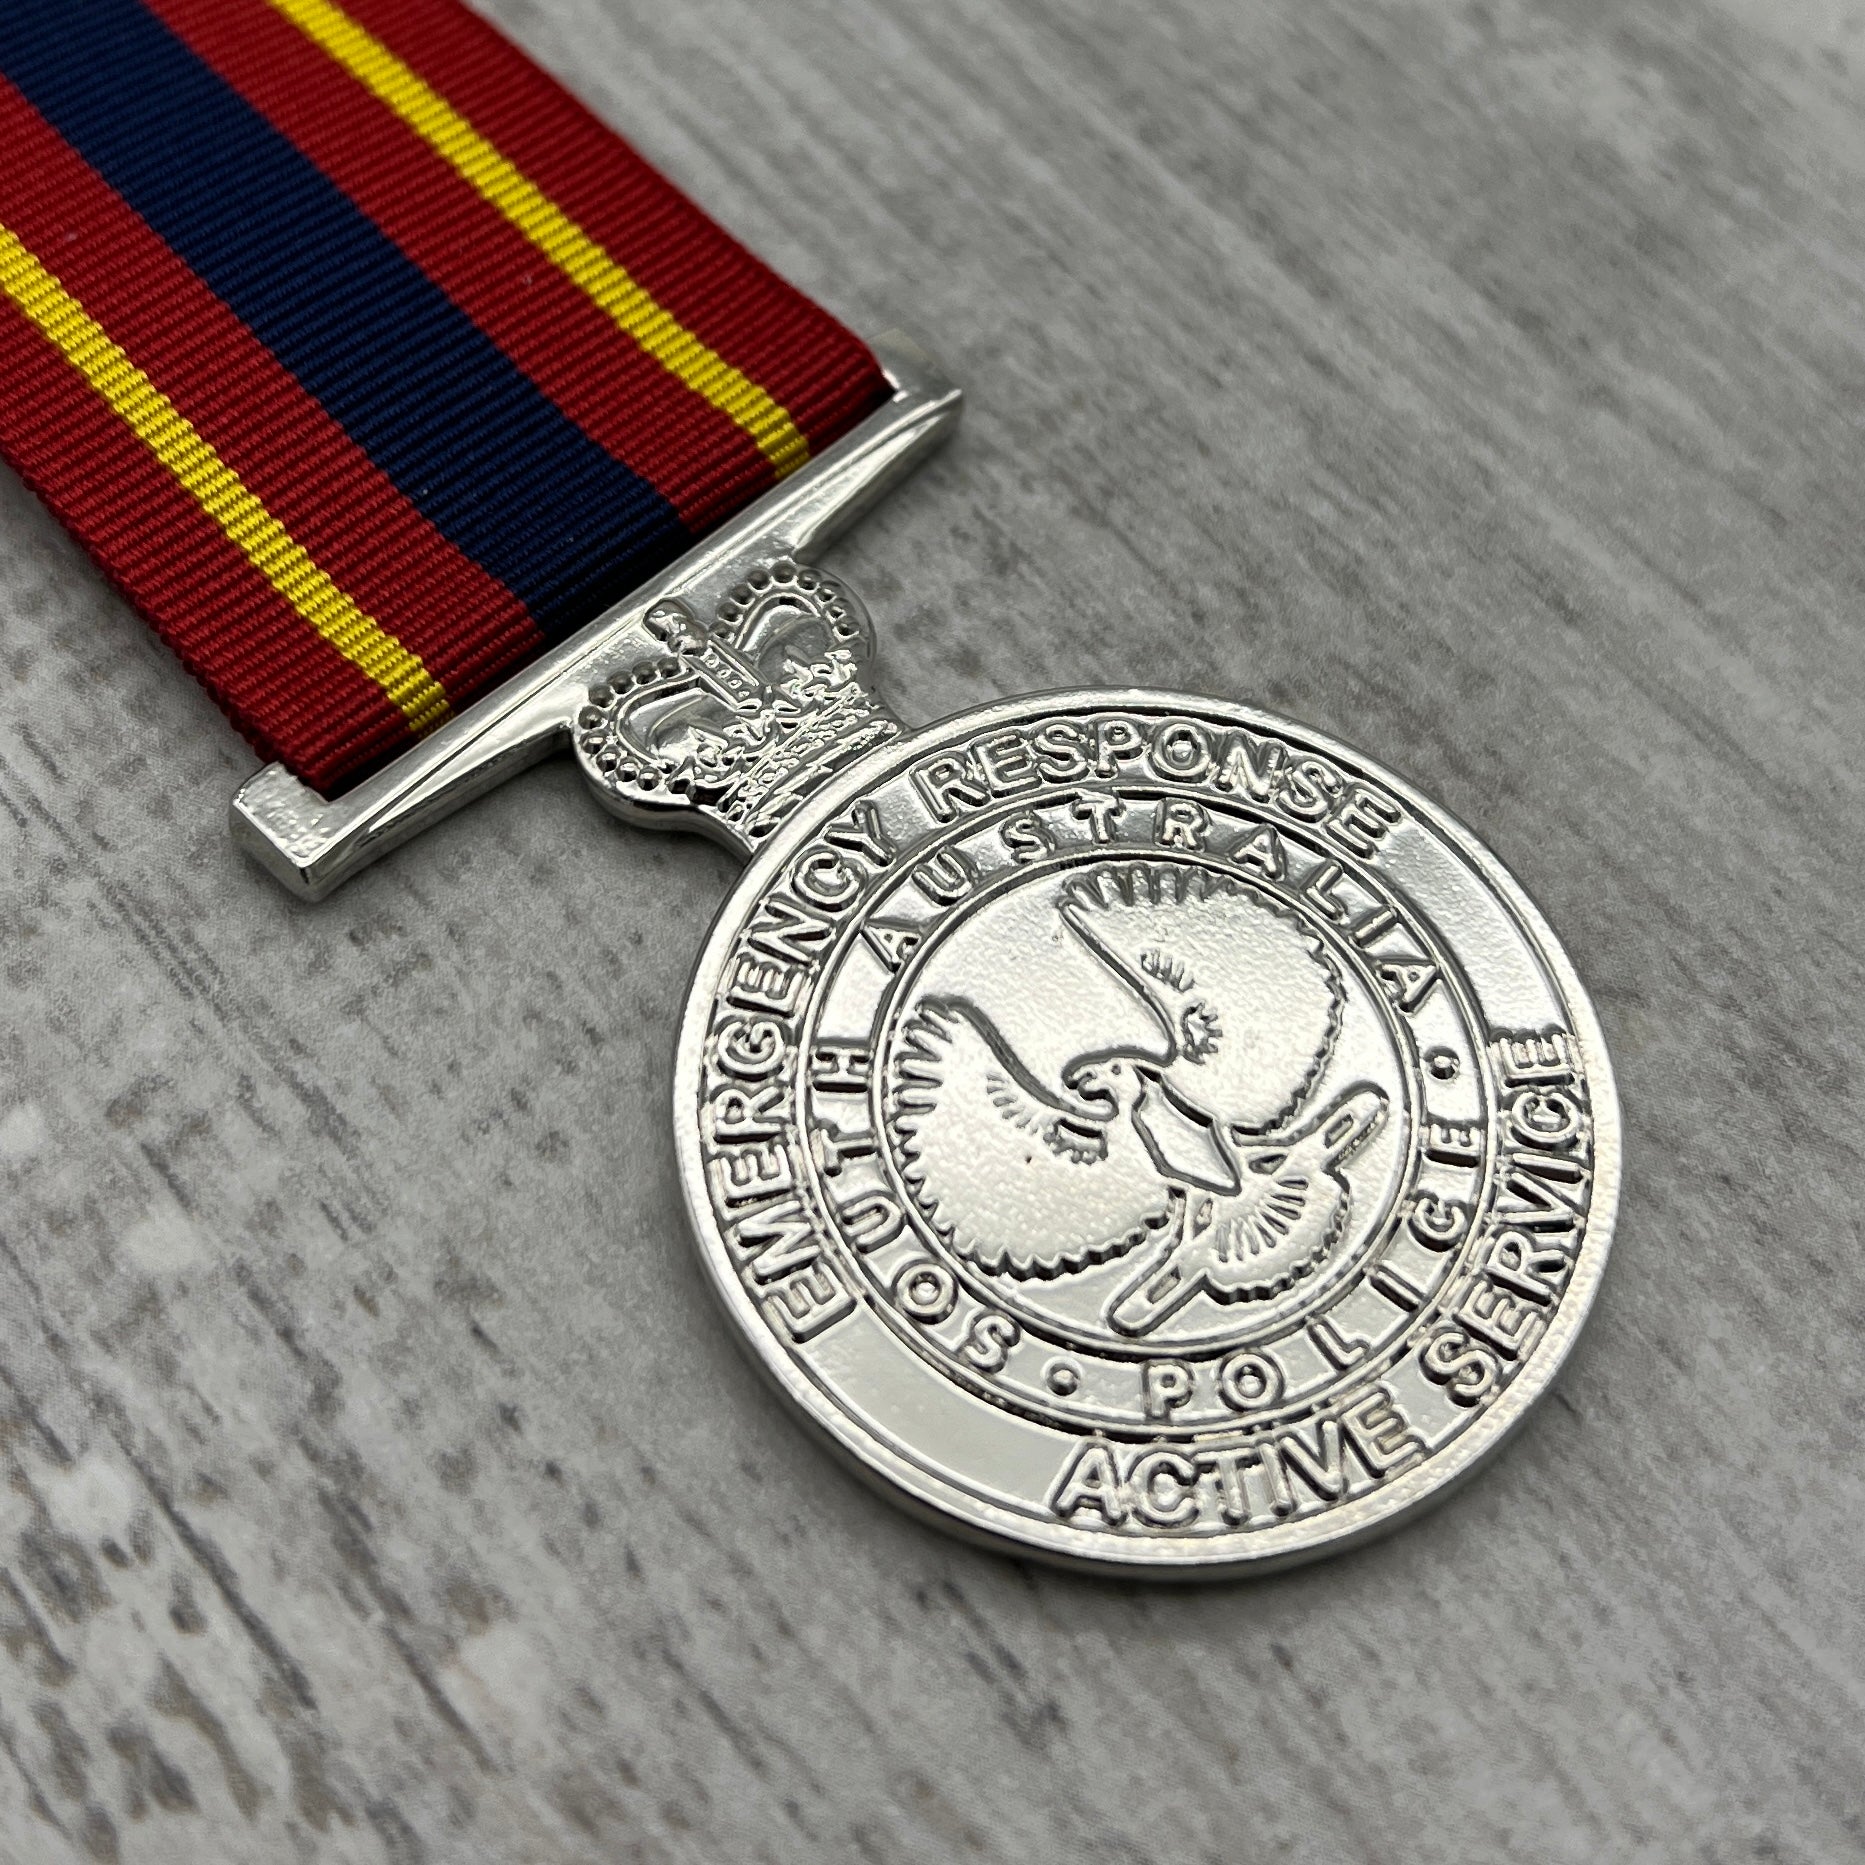 South Australia - Emergency Response Active Service Medal - Foxhole Medals